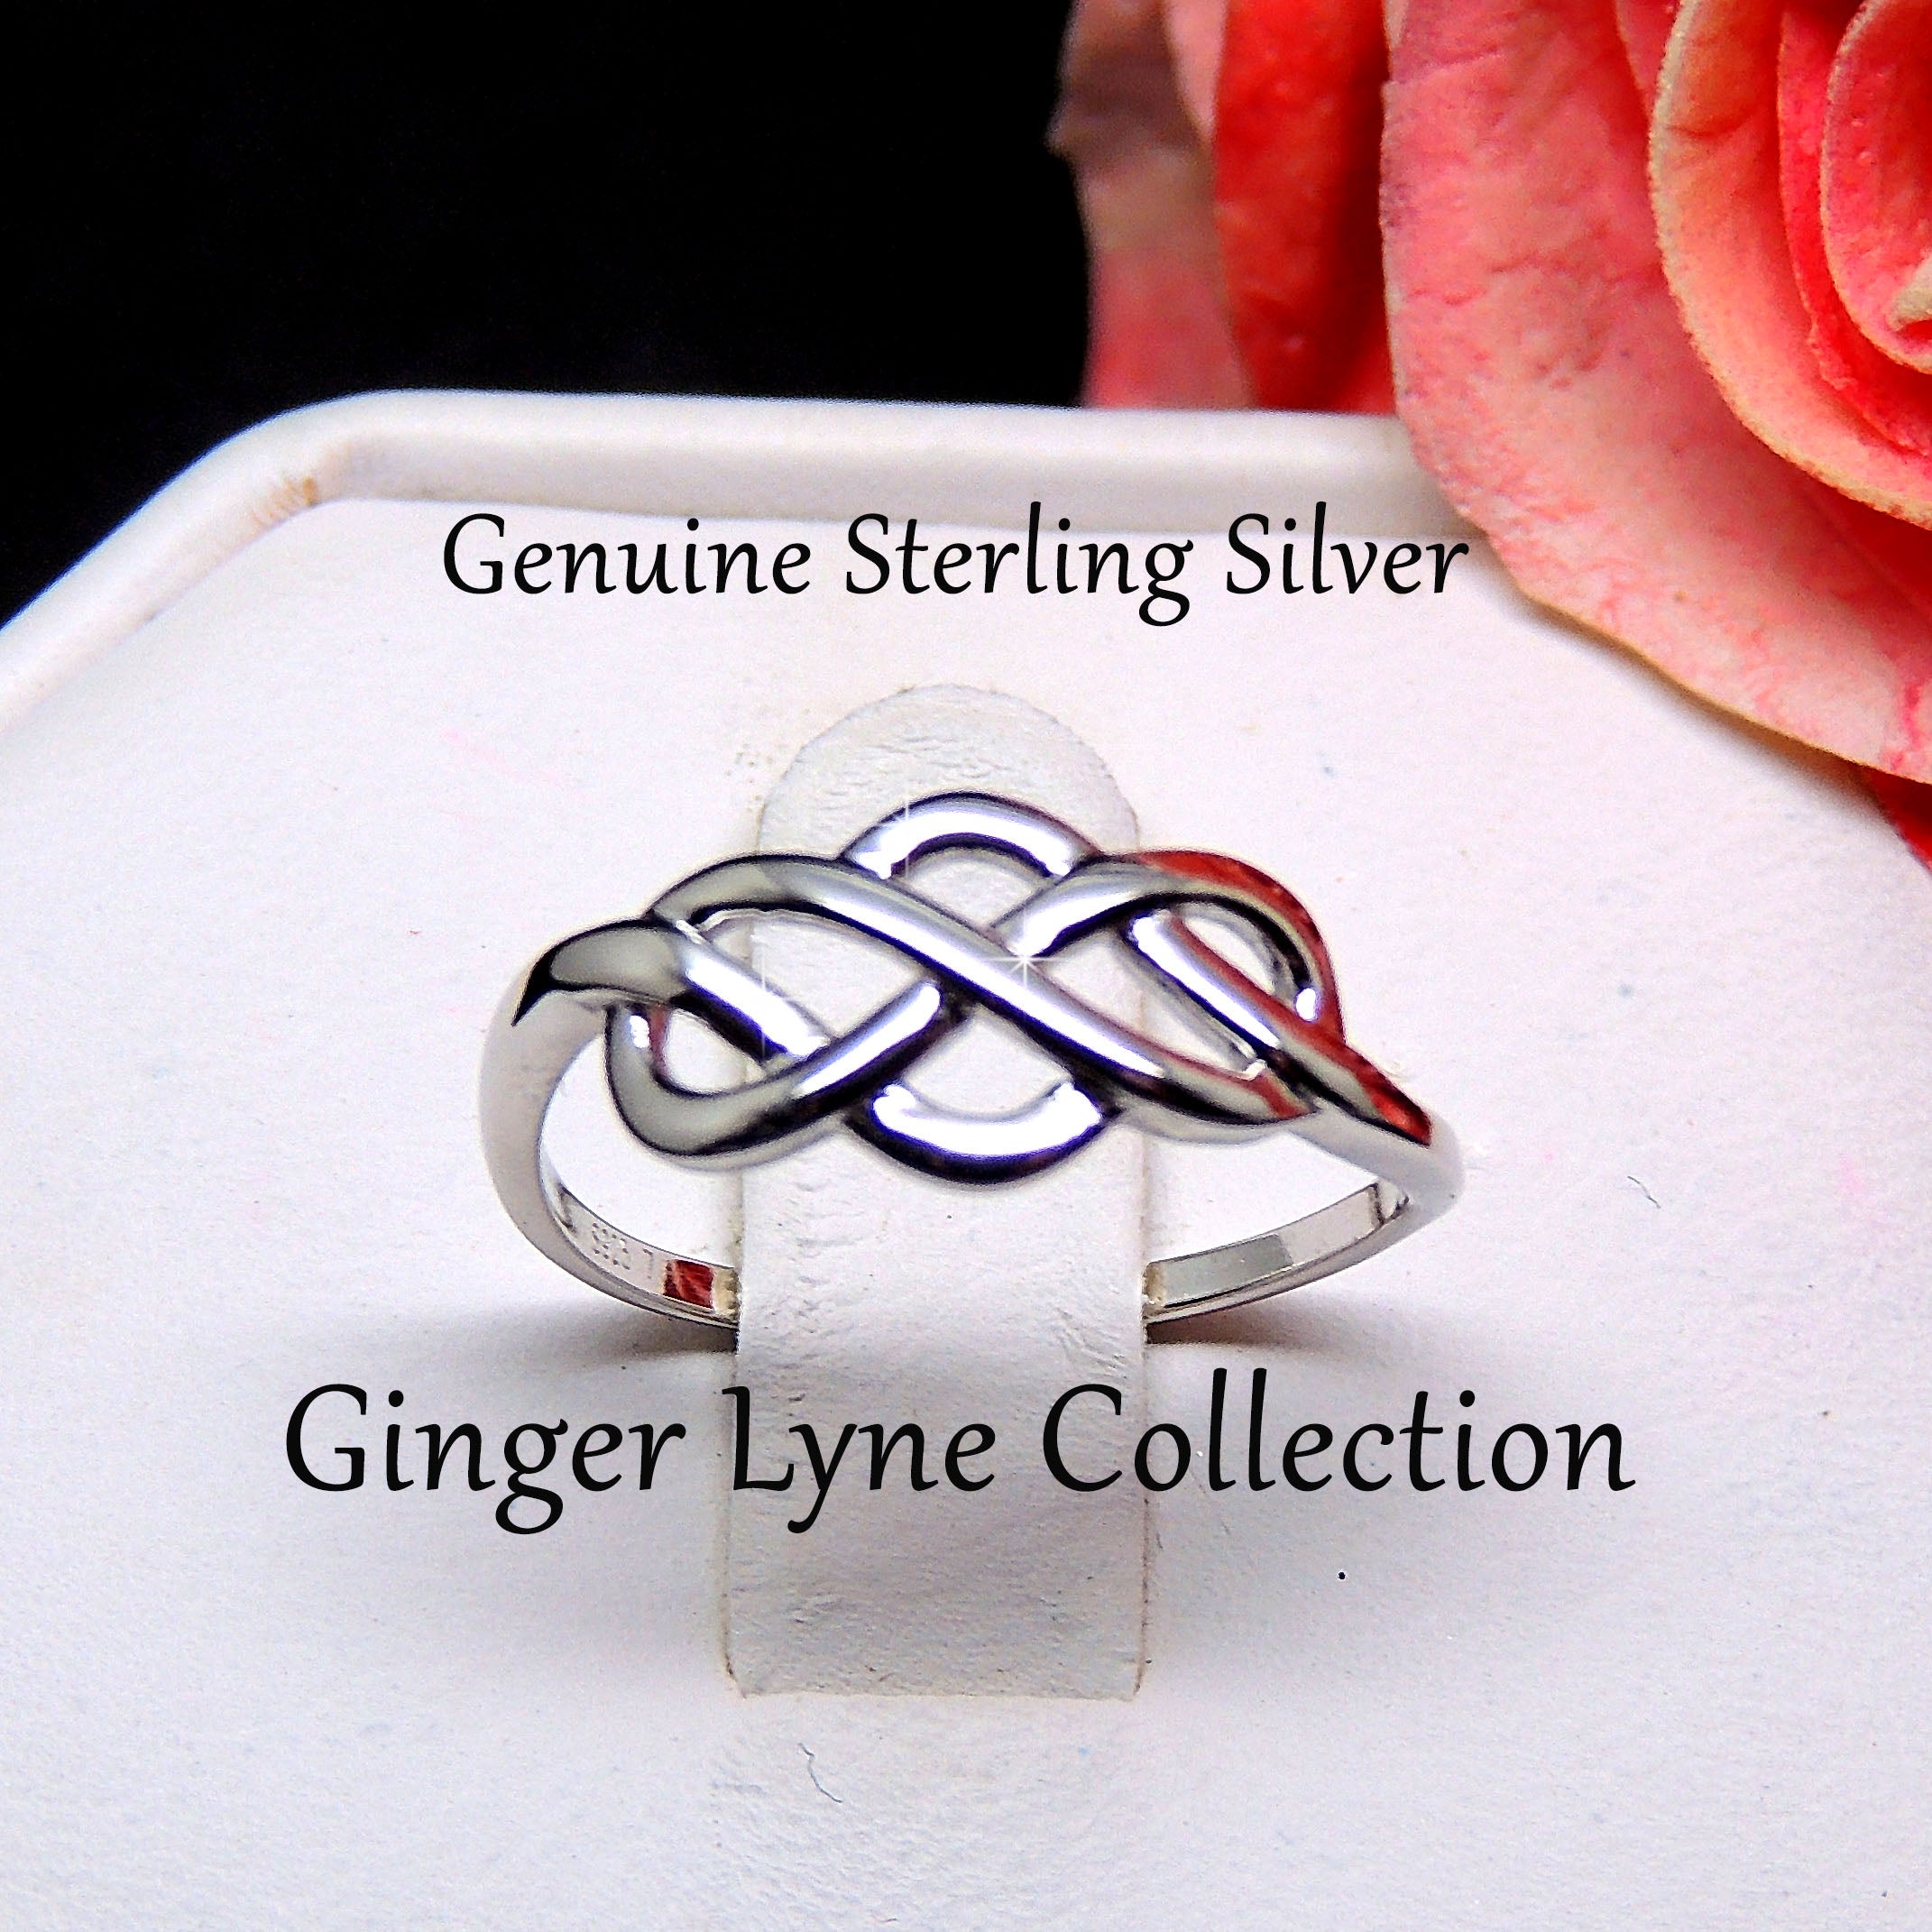 Continuum Infinity Ring 925 Sterling Silver Girls Womens Ginger Lyne Collection - 5